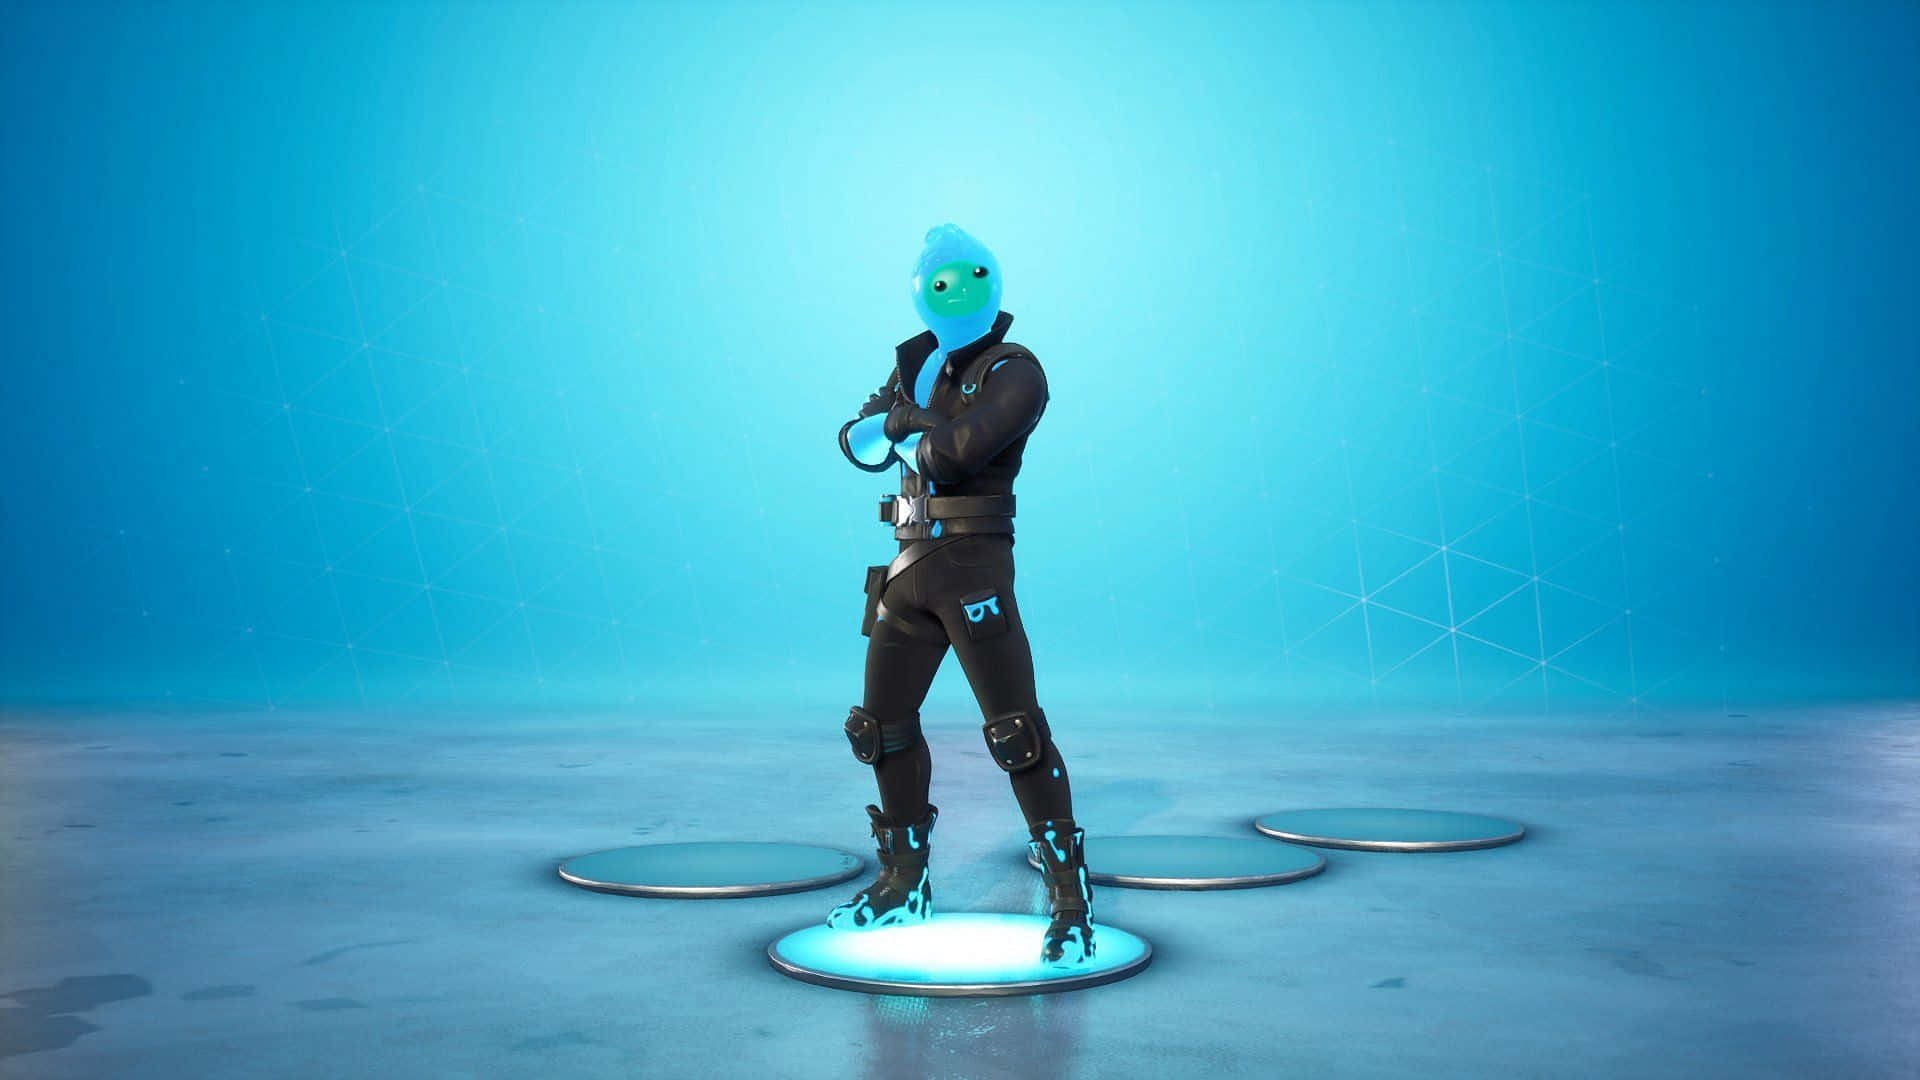 Strike fear into your enemies with an awesome Fortnite profile picture